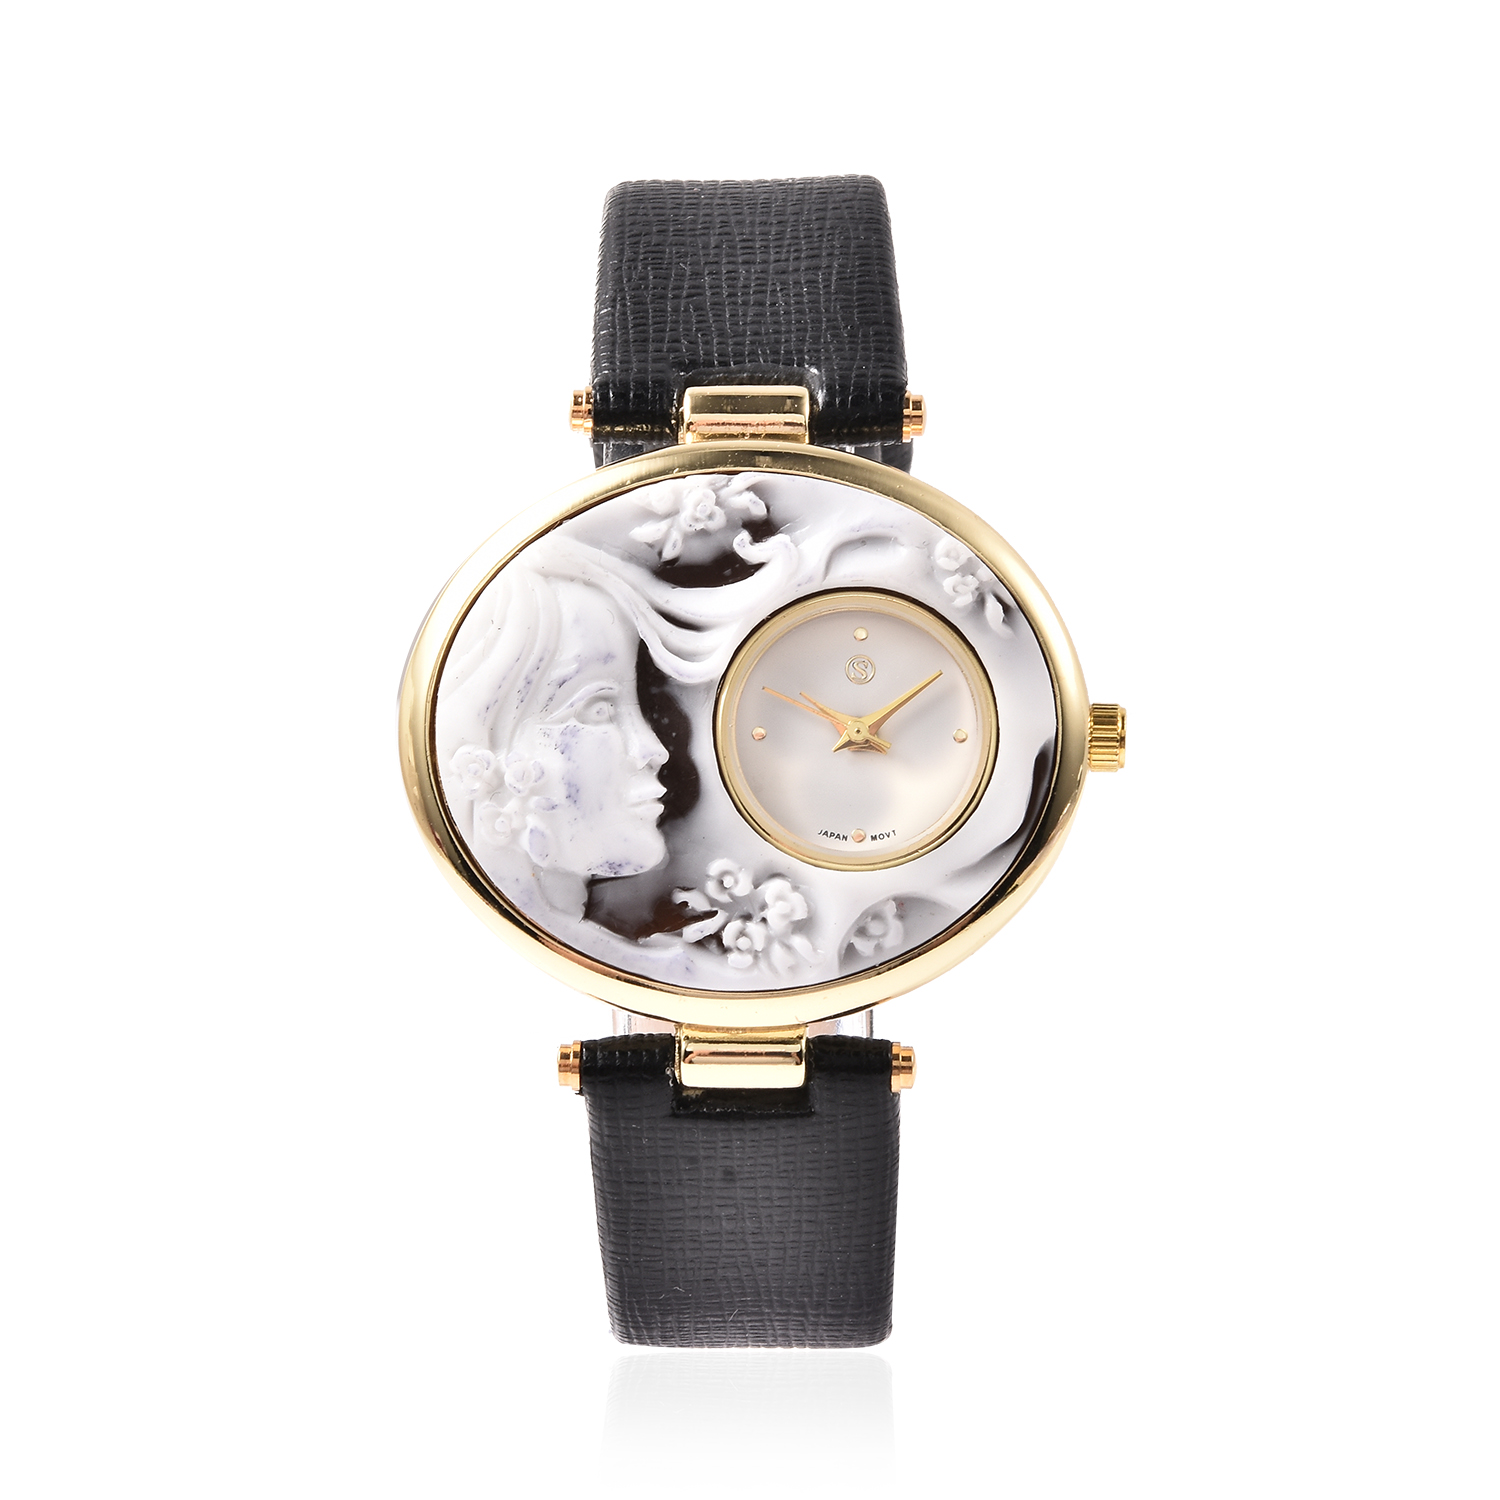 STRADA Japanese Movement Cameo Carved Dial Gold Tone Watch with Black Strap